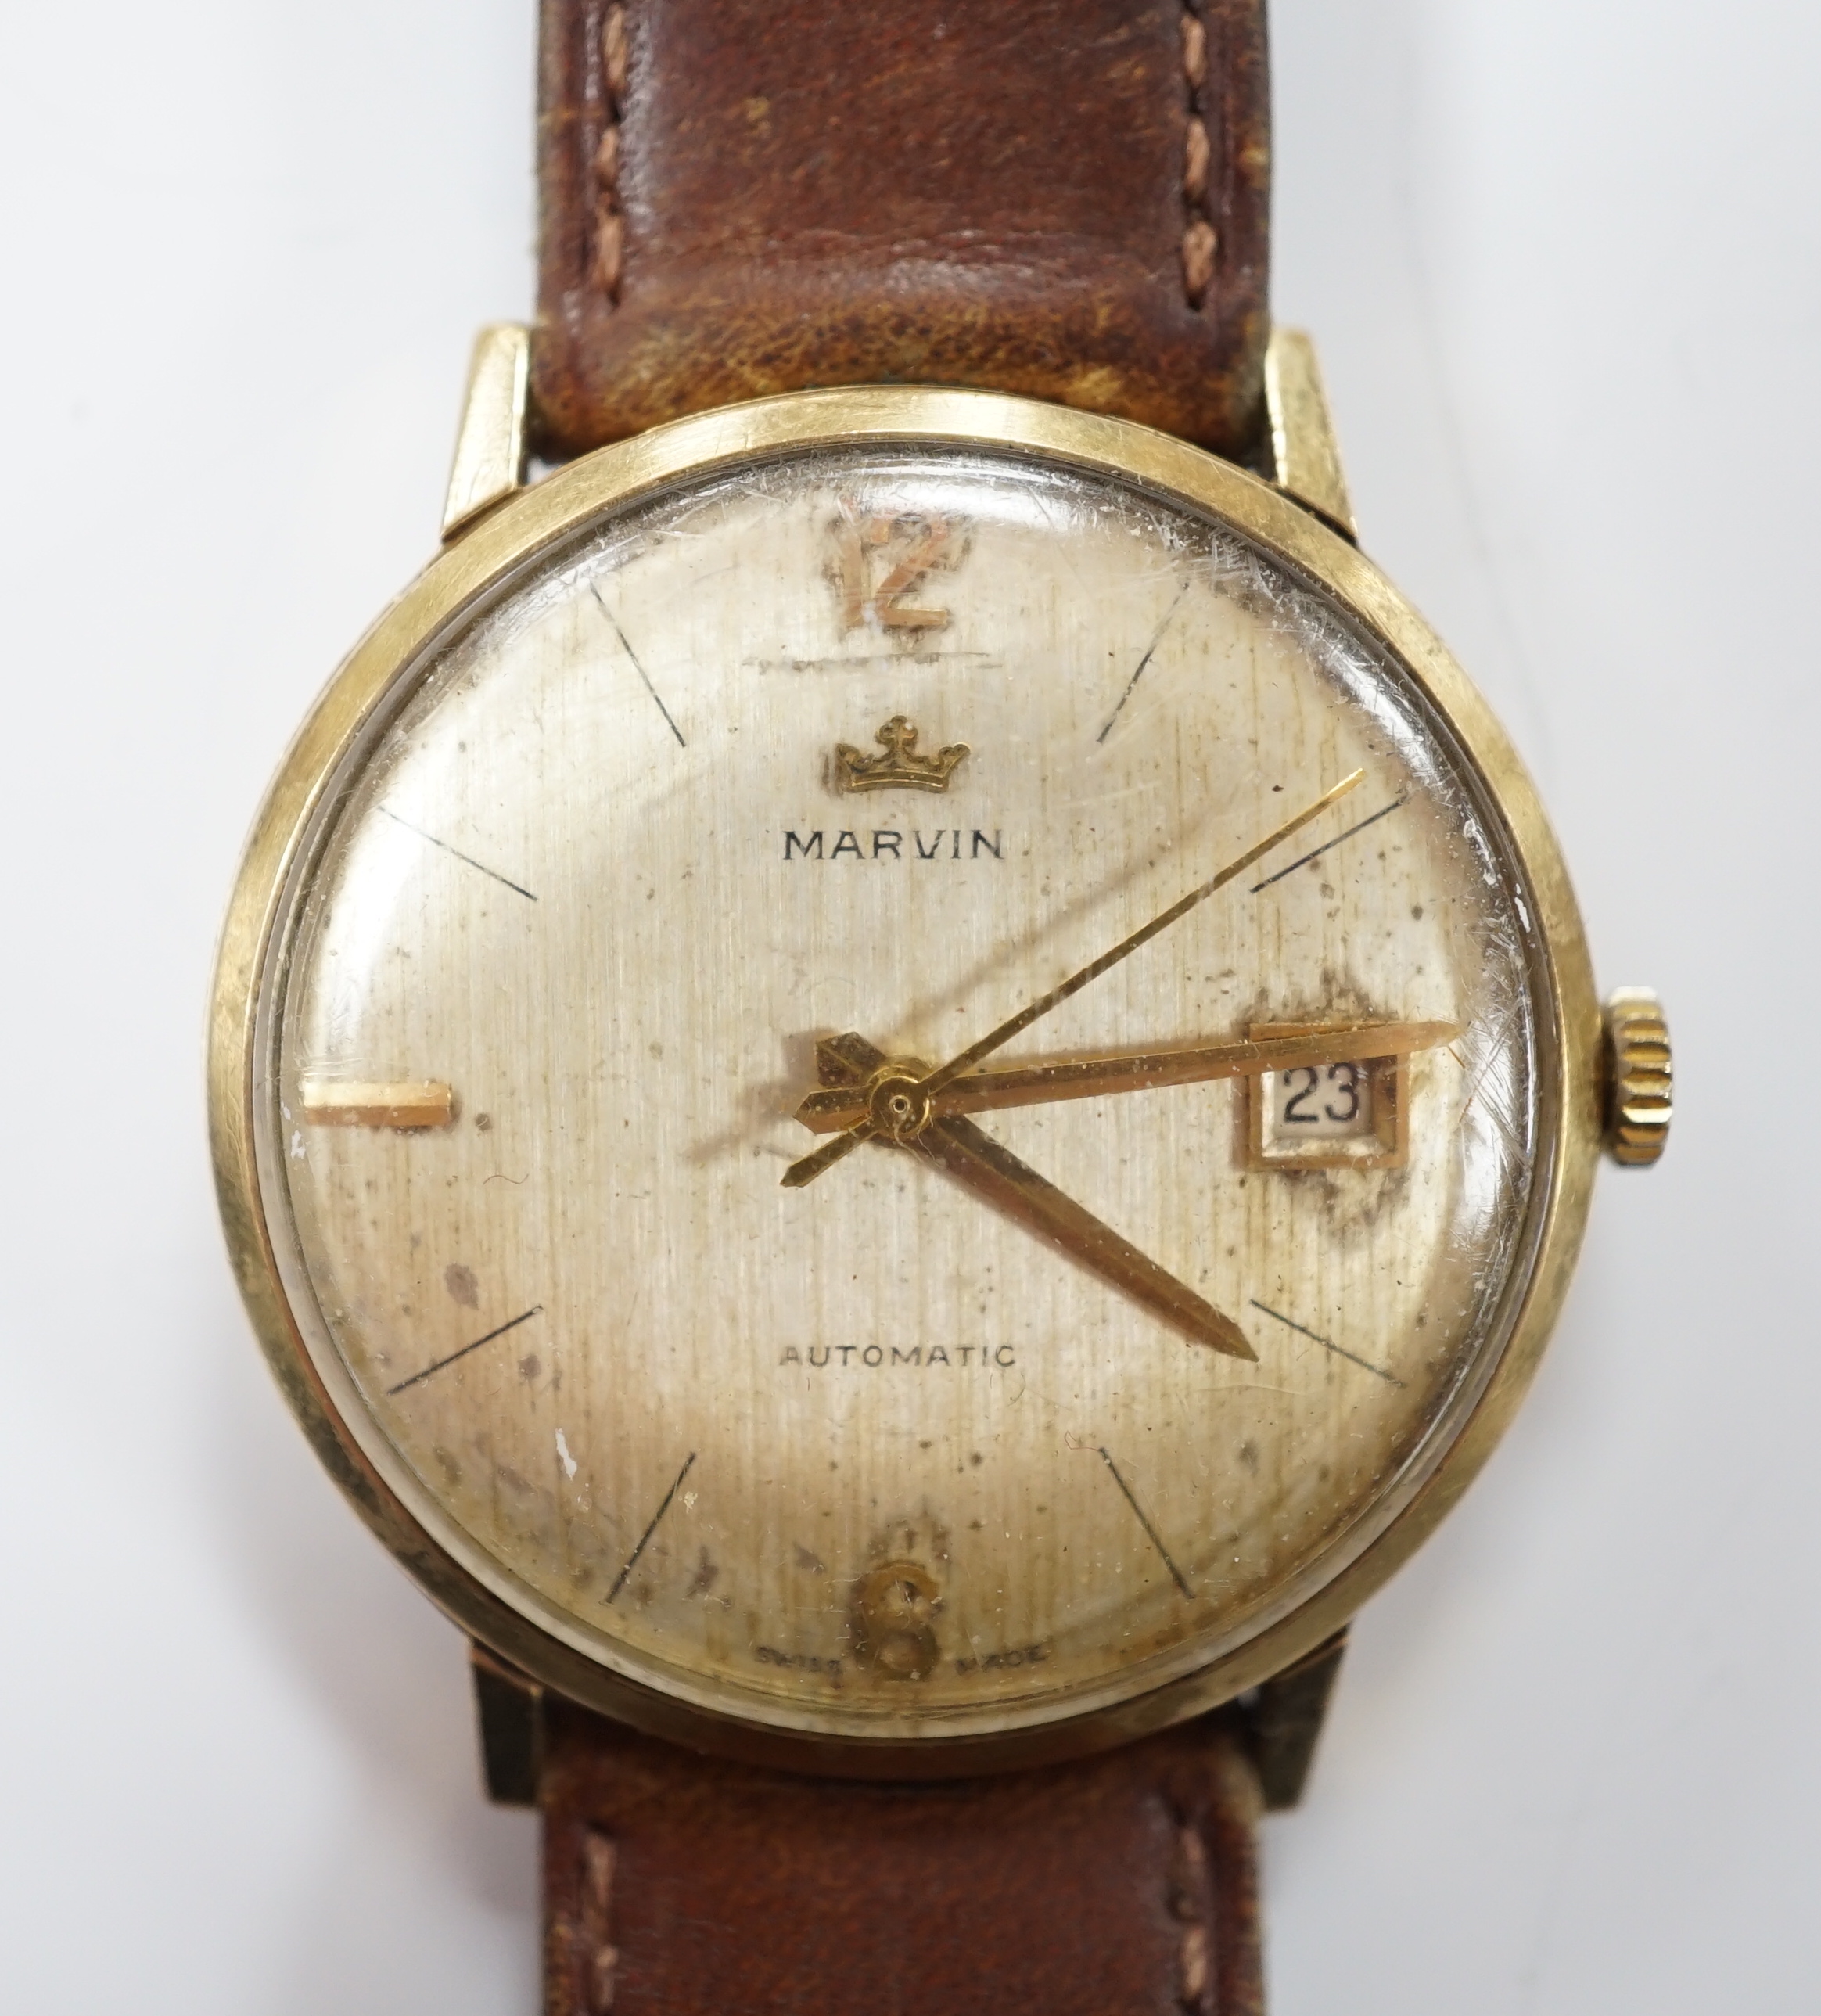 A gentleman's 9ct gold Marvin automatic wrist watch, with date aperture, on a leather strap.